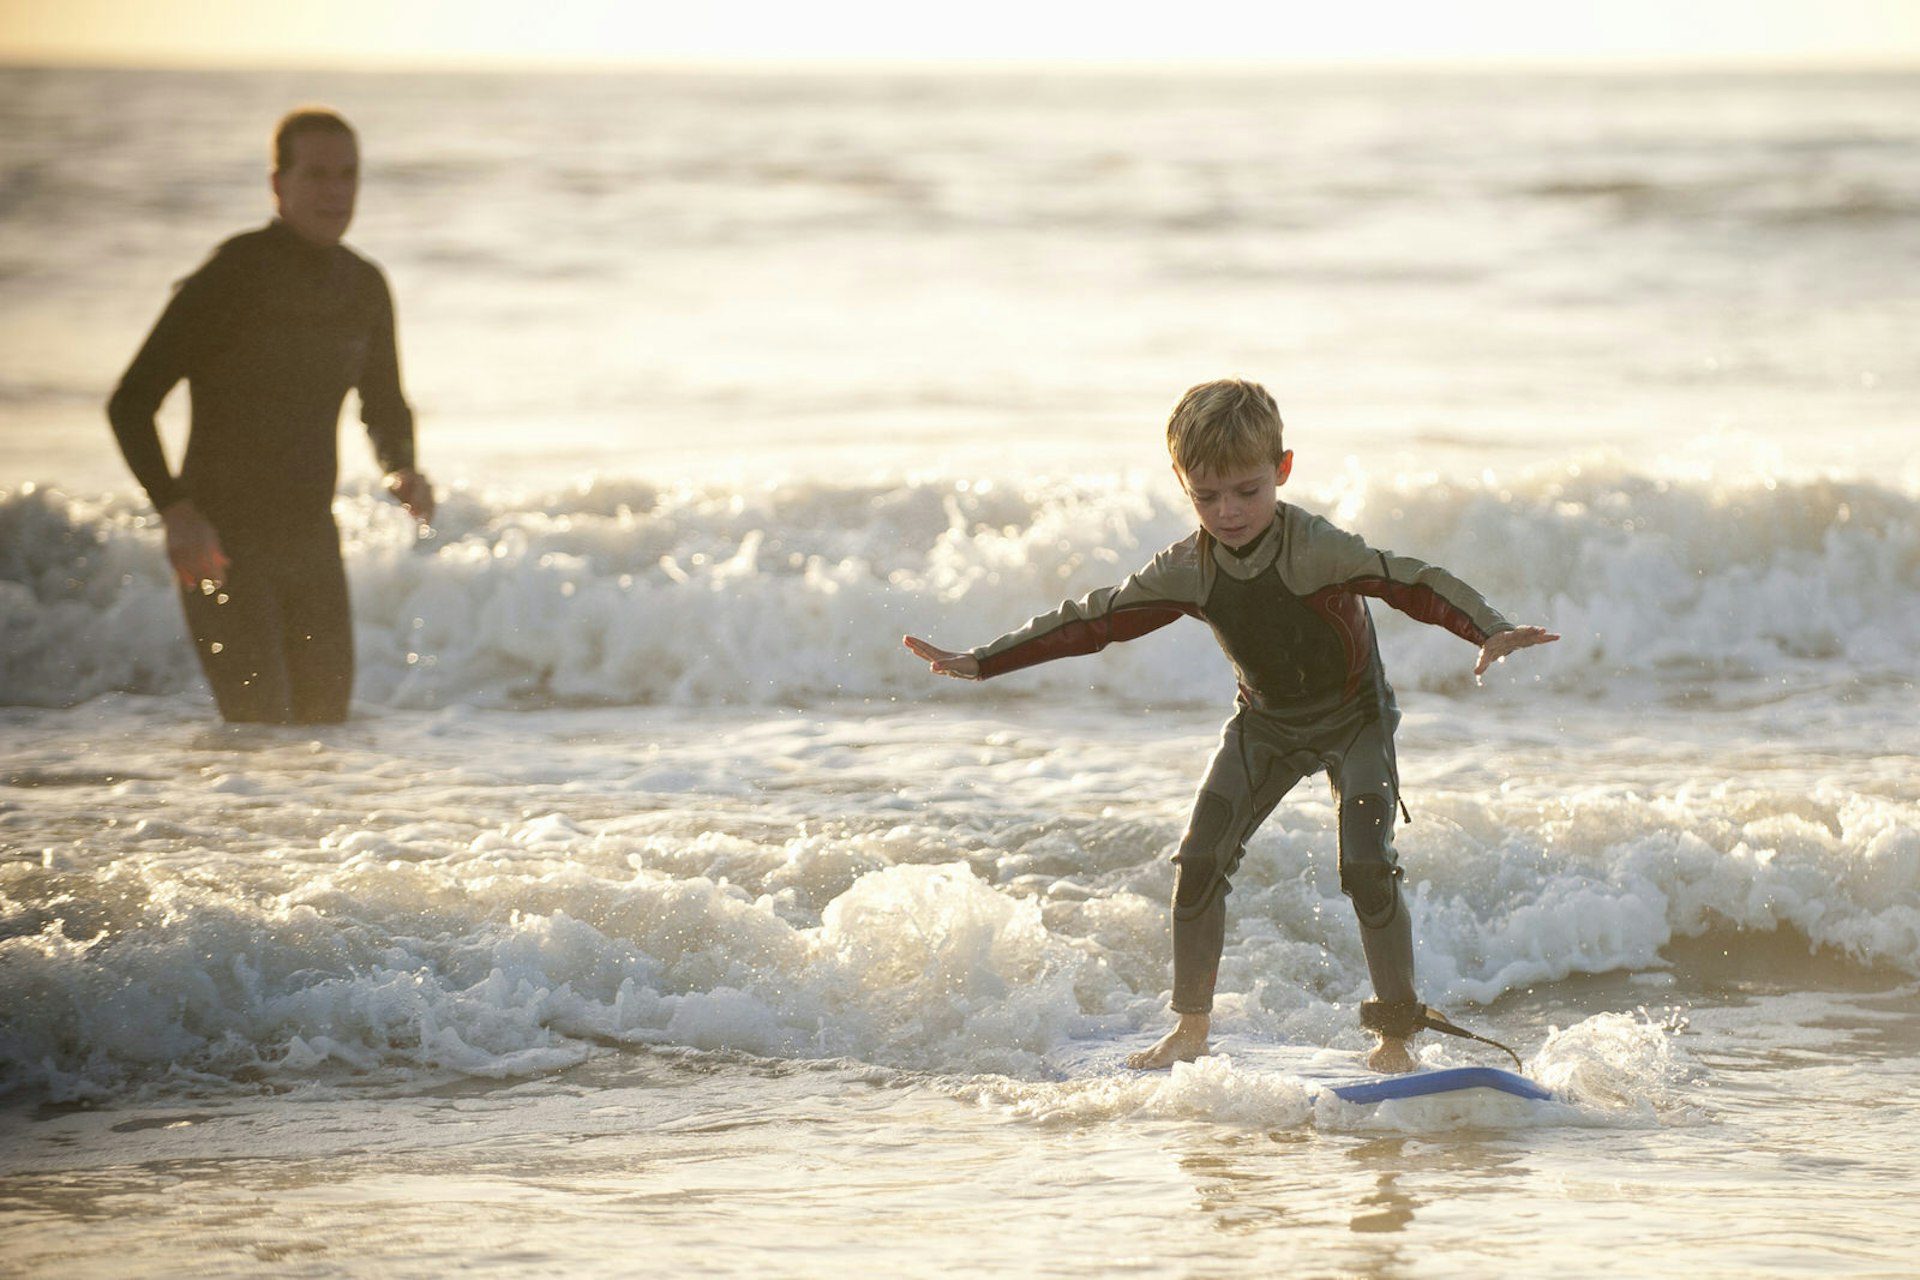 A father watches from a short distance as his small son learns to catch a wave while surfing close to the shoreline.